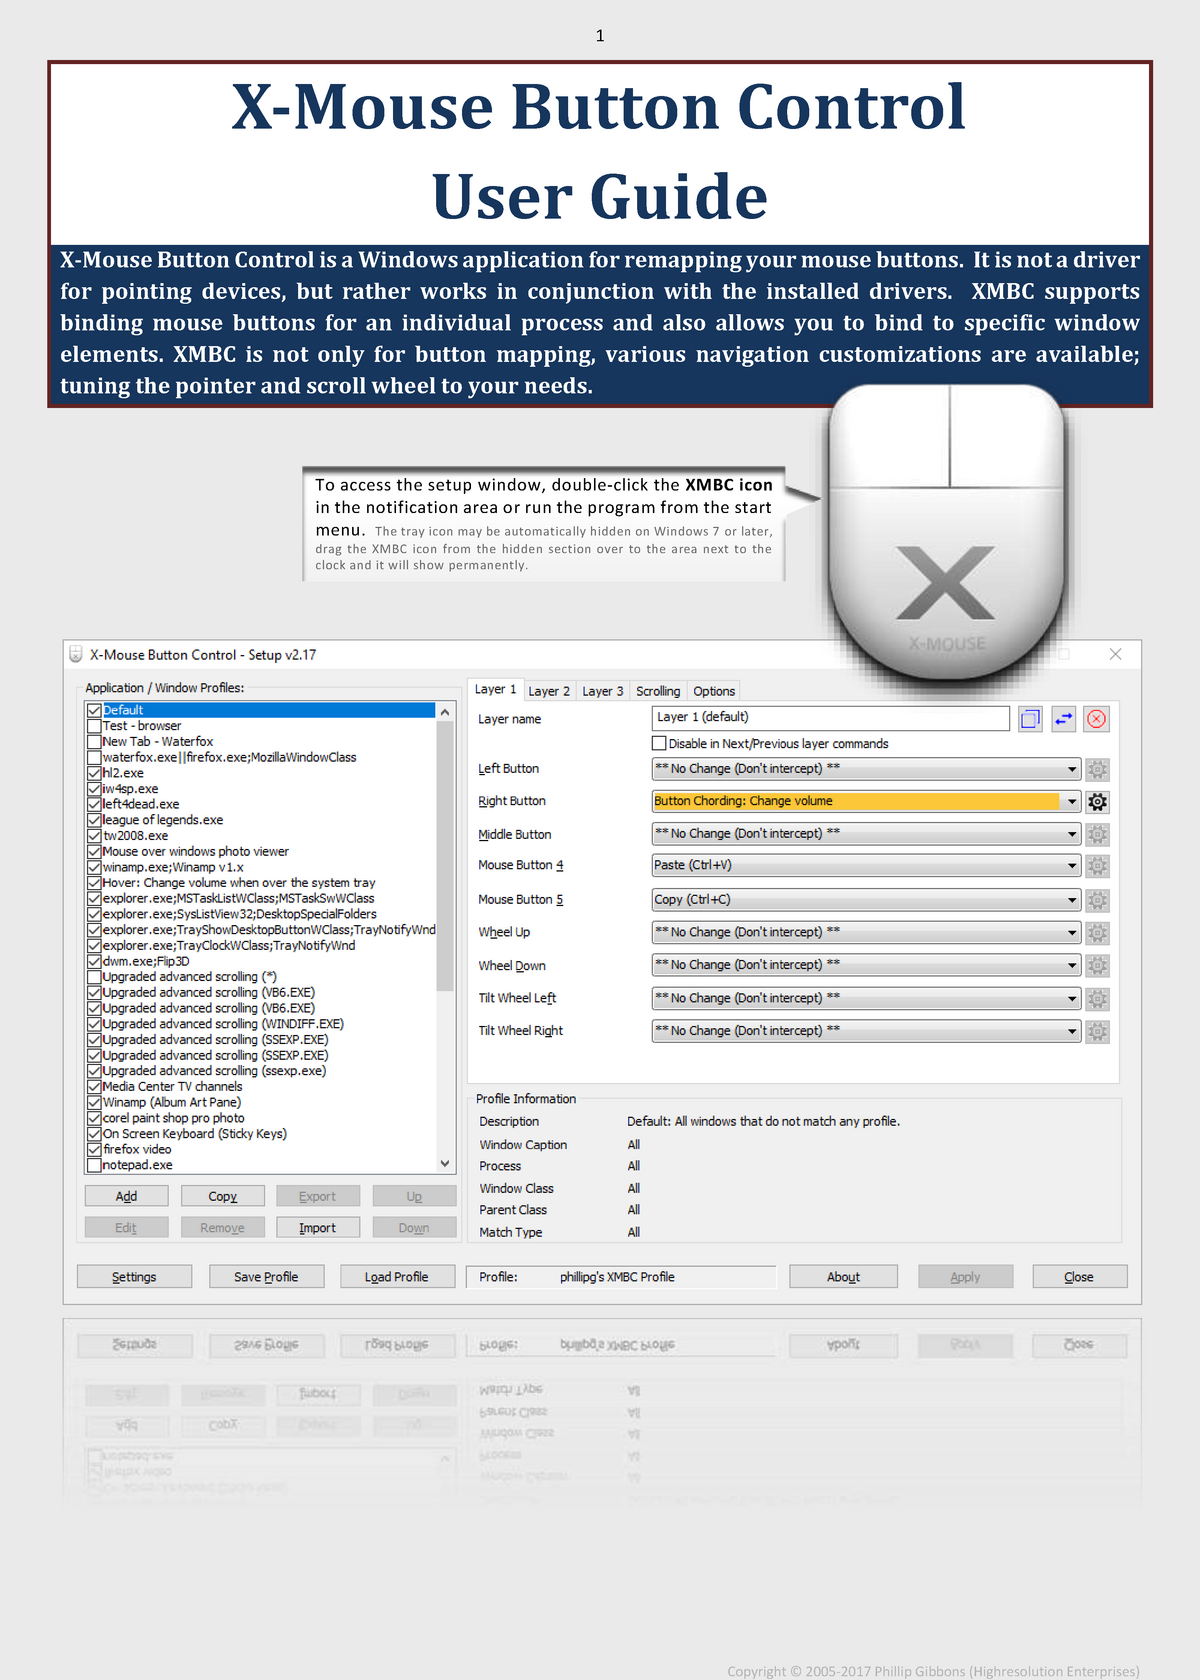 X-mouse button user guide - Warning: TT: undefined function: 32 Warning: TT: